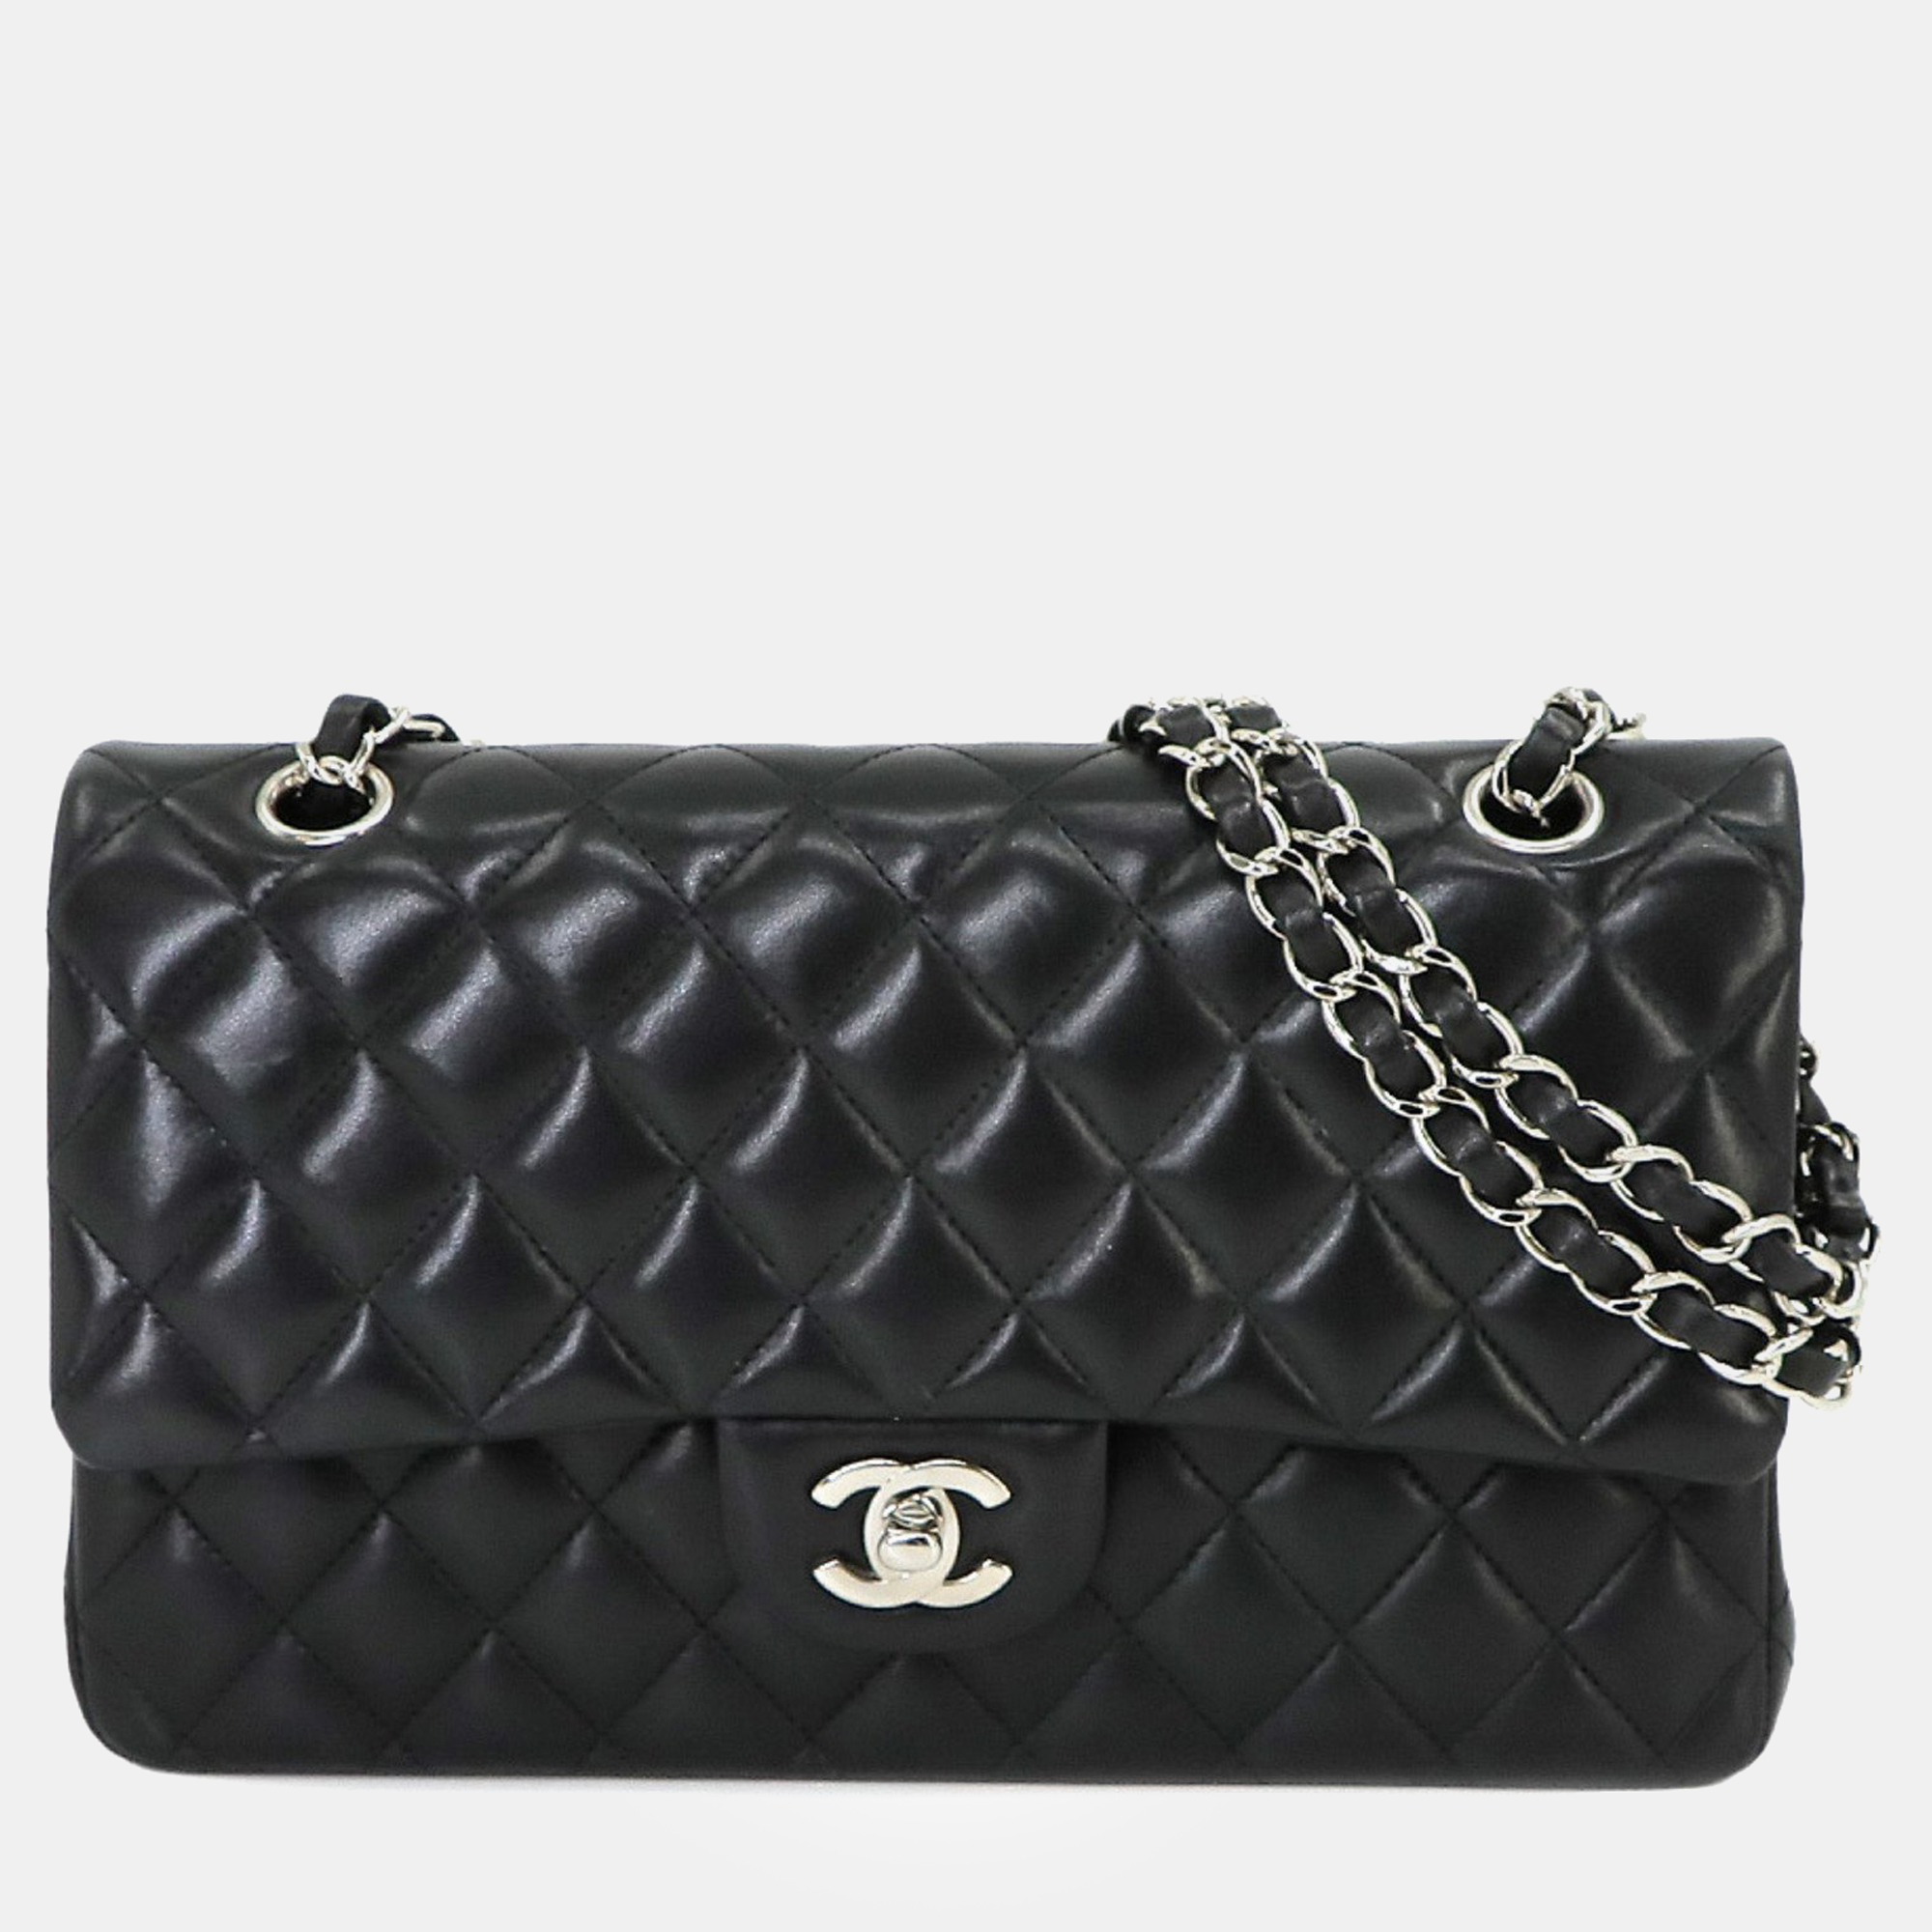 Chanel  lambskin leather medium classic double flap shoulder bags